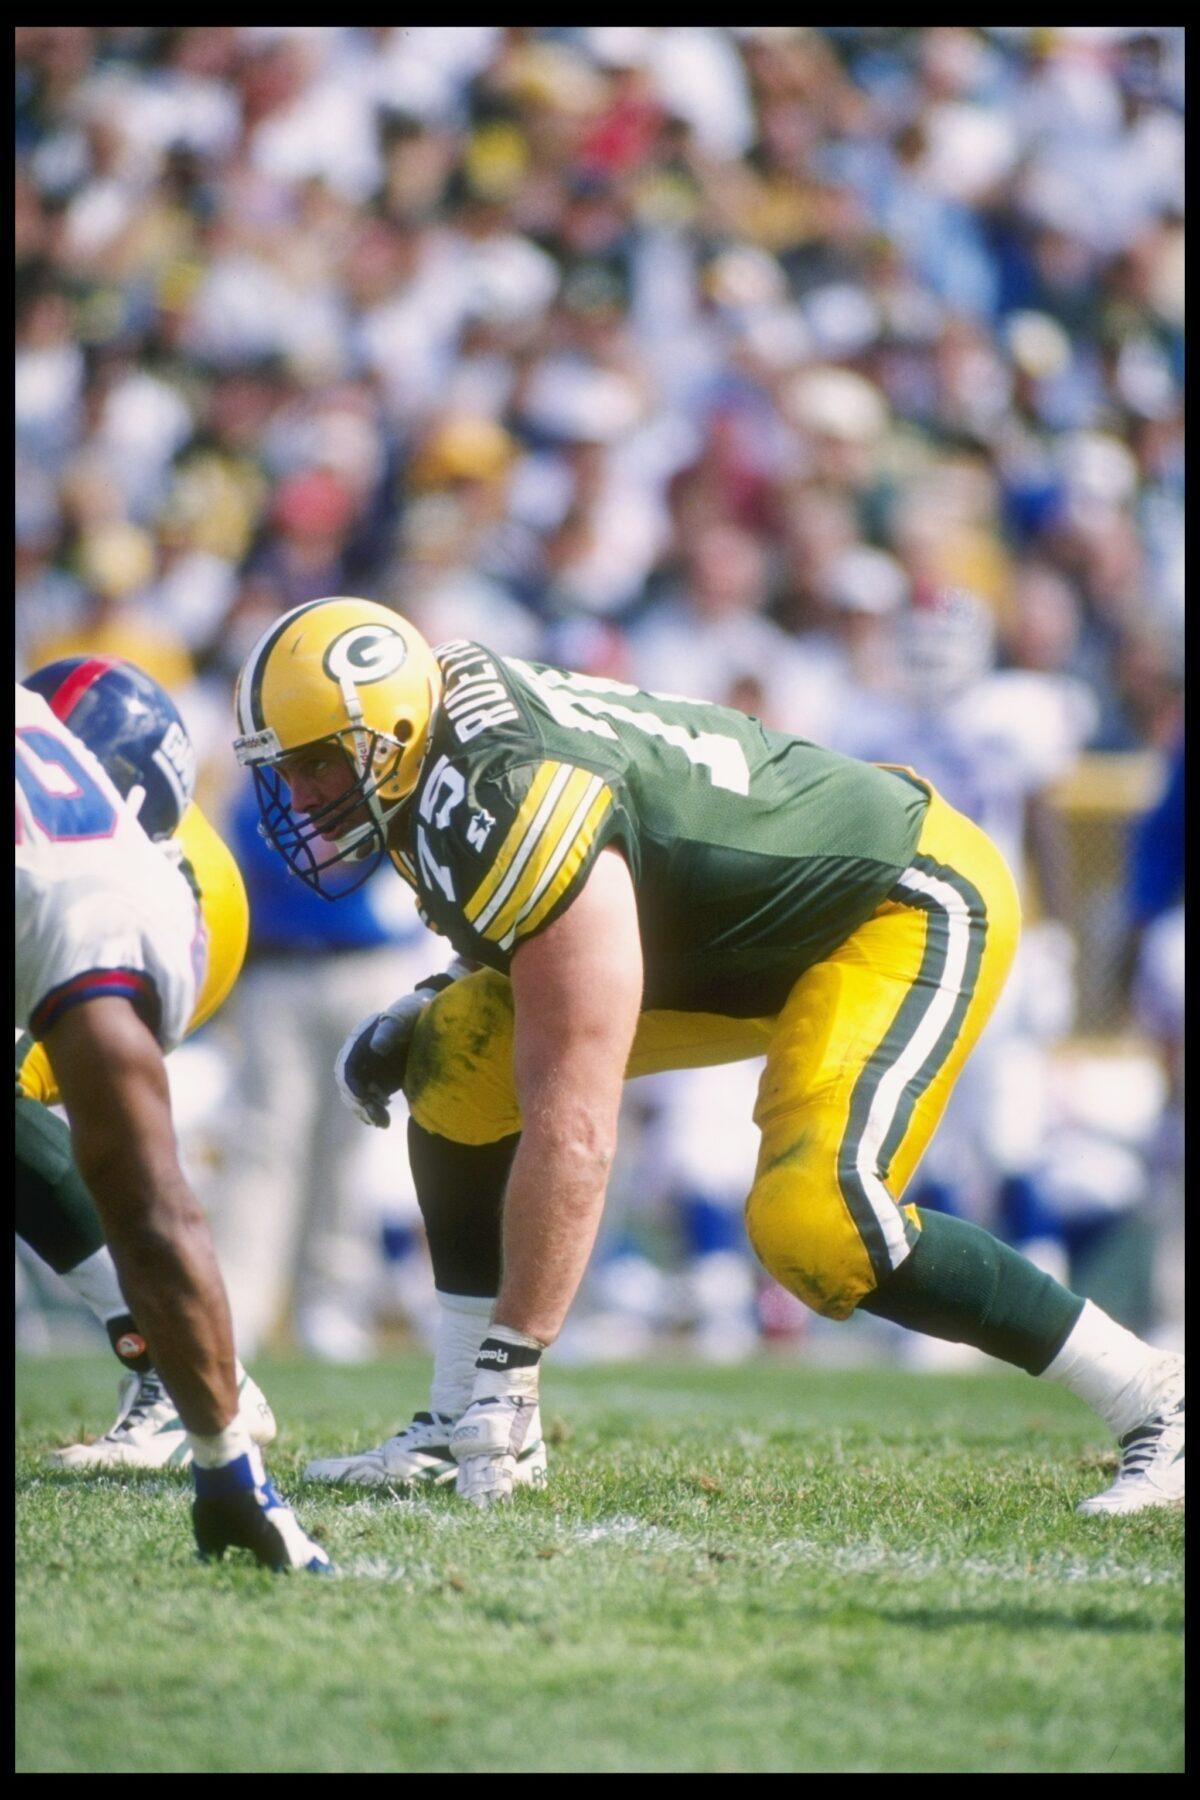 Ken Ruettgers of the Green Bay Packers in his stance during a game in Green Bay, Wis., on Sept. 17, 1995. (Jonathan Daniel/Allsport)